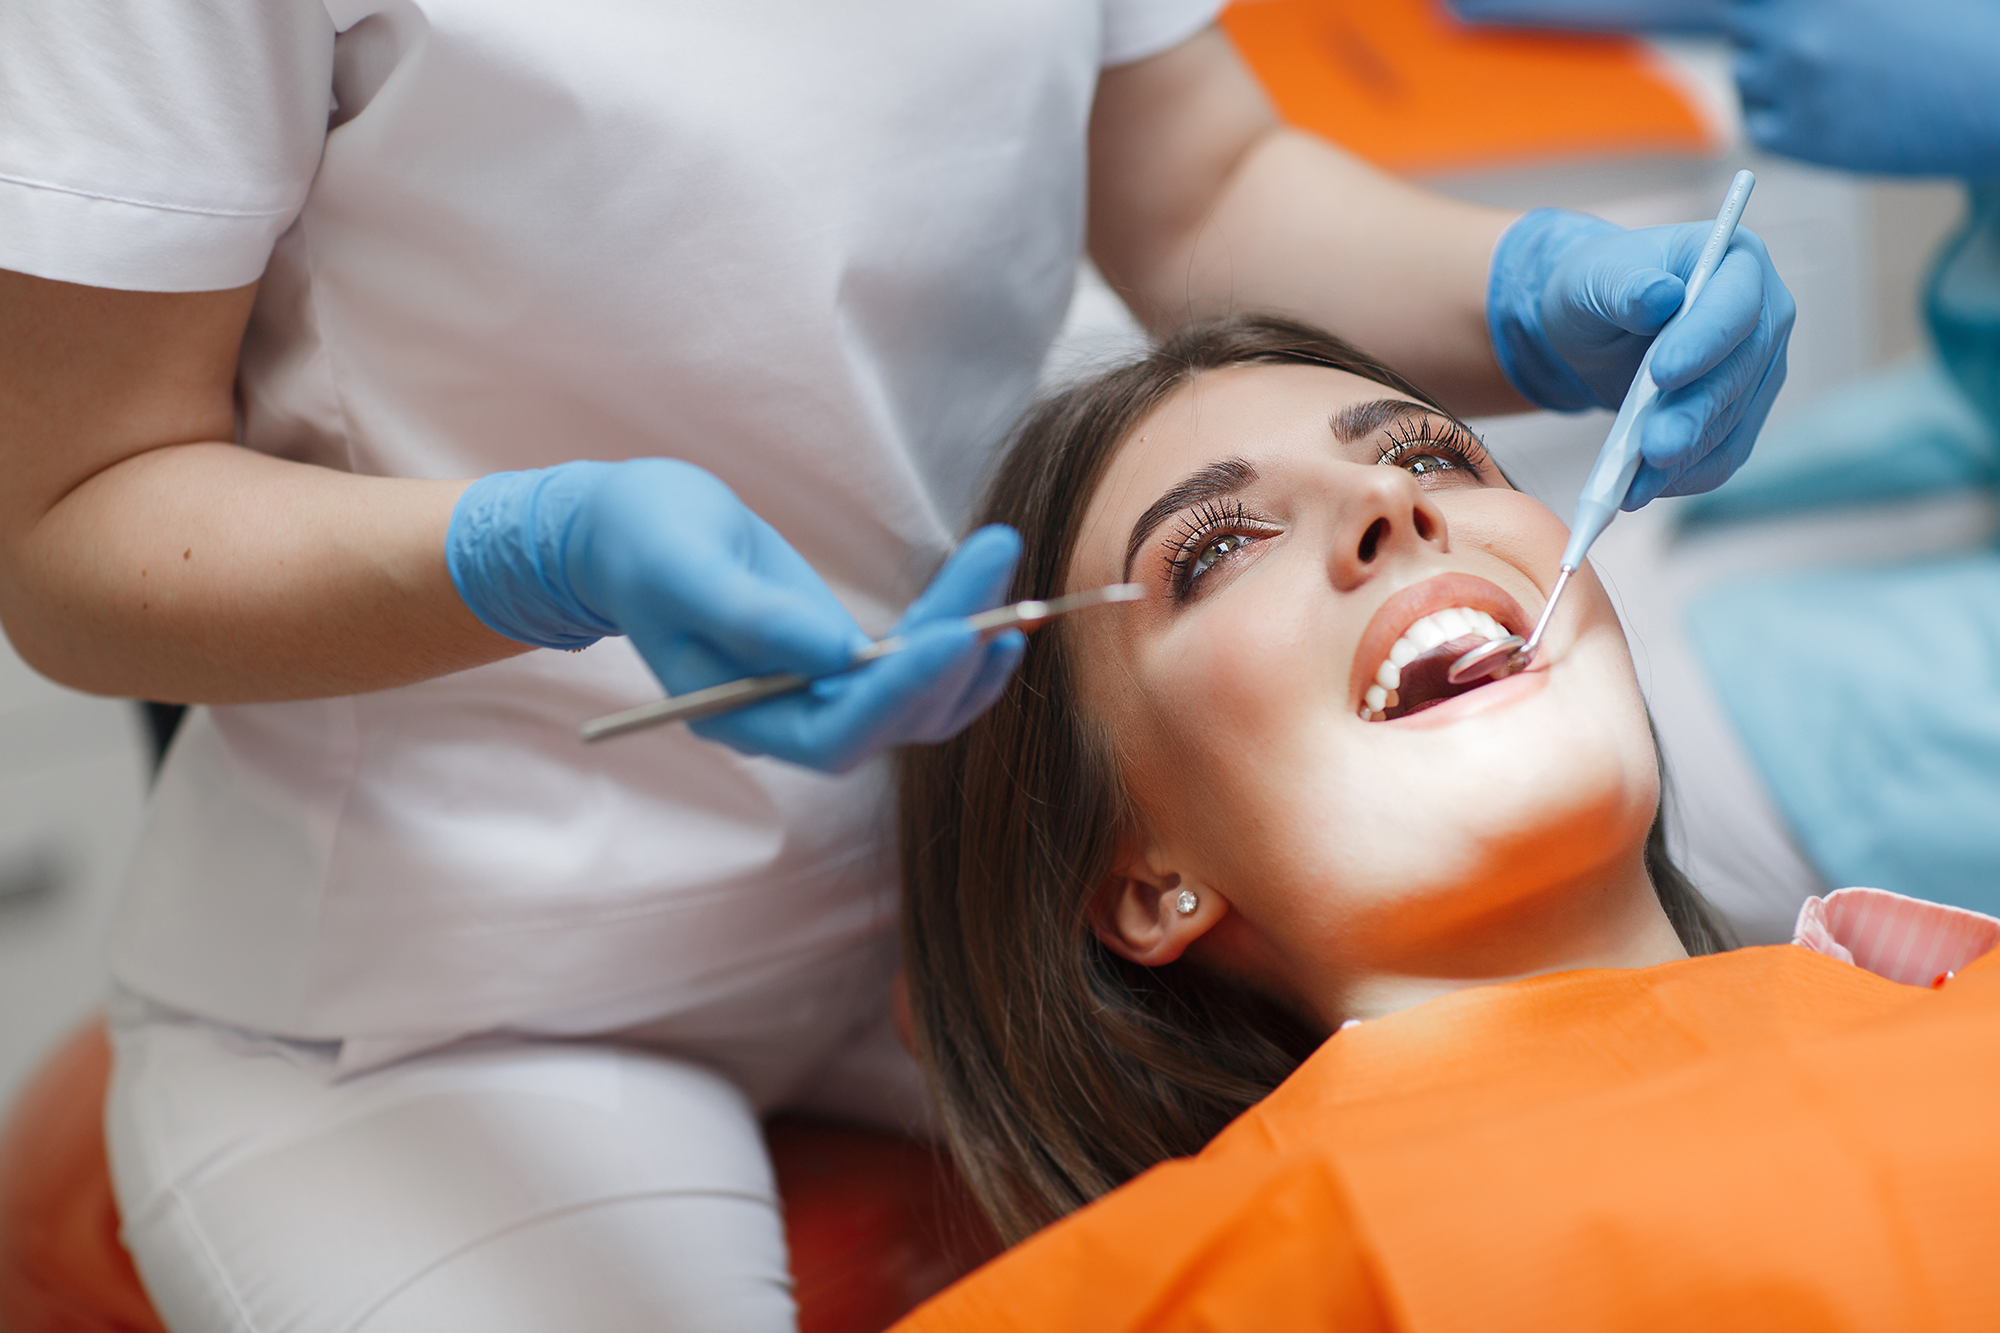 waco dental assisting school in waco tx. The Search for a Dental Assistant School Near Waco, TX Dental Assistant Schools Near Waco. Start Your Dental Career Now With Our 12-Week Dental Assistant Program. Call Us Today (254) 556-3615. Sanger Education in Waco Texas 76710 Dr. Chad Latino. Dental Assisting School In Waco, dental assistant, dental assisting, dental assisting program, online dental assistant school, dental school program, Start Your Dental Career Now With Our 12-Week Dental Assistant Program. Call Us Today (254) 556-3615. Home, About, Why Choose Us, Class and Tuition, Student Resources, Blog, Our Sanger Blog, Enroll, Contact us